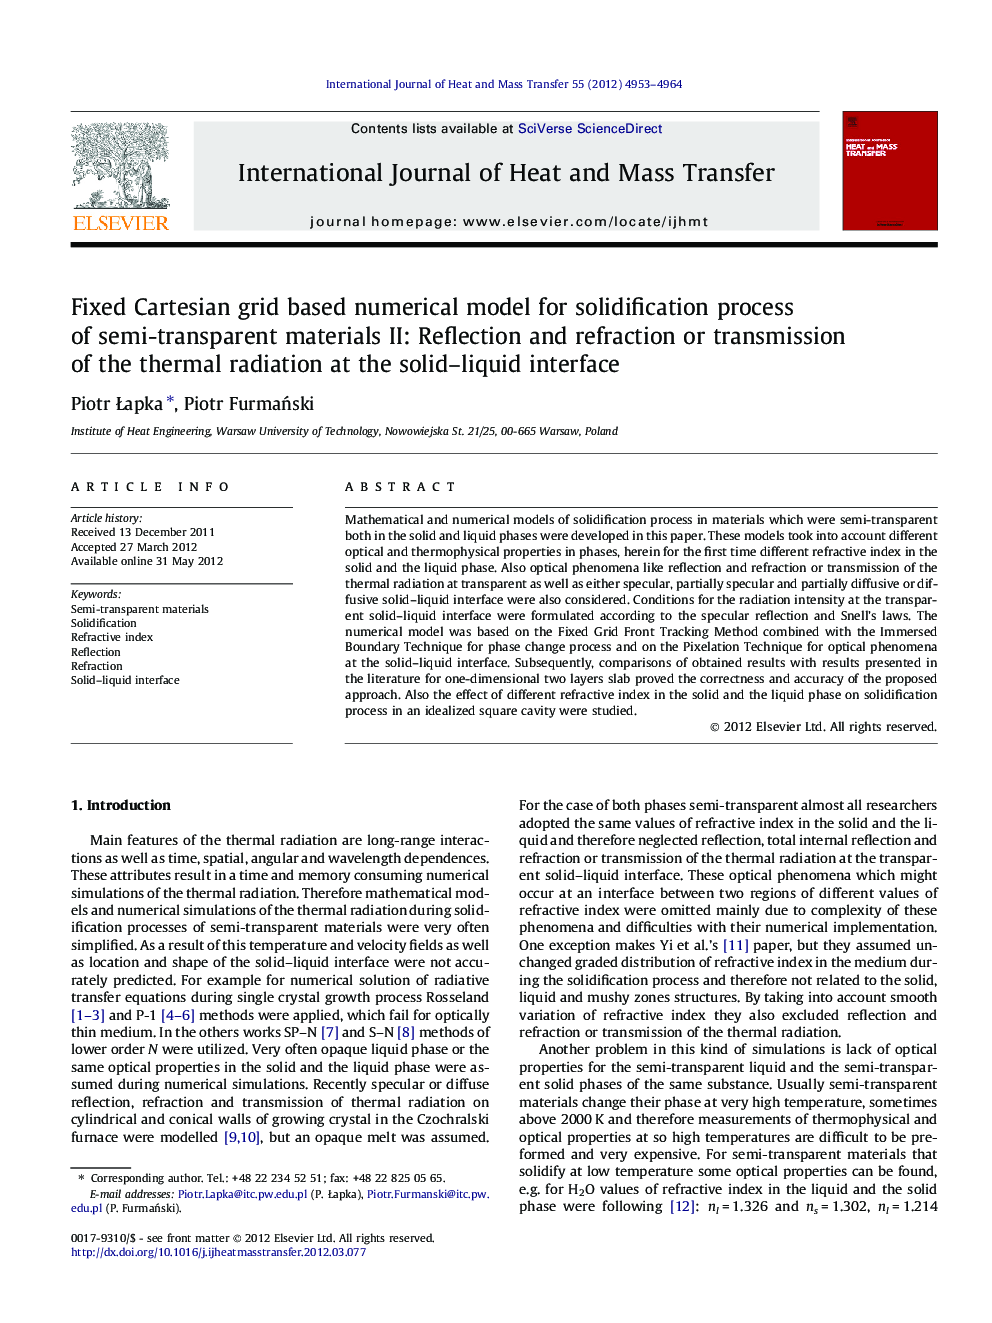 Fixed Cartesian grid based numerical model for solidification process of semi-transparent materials II: Reflection and refraction or transmission of the thermal radiation at the solid-liquid interface